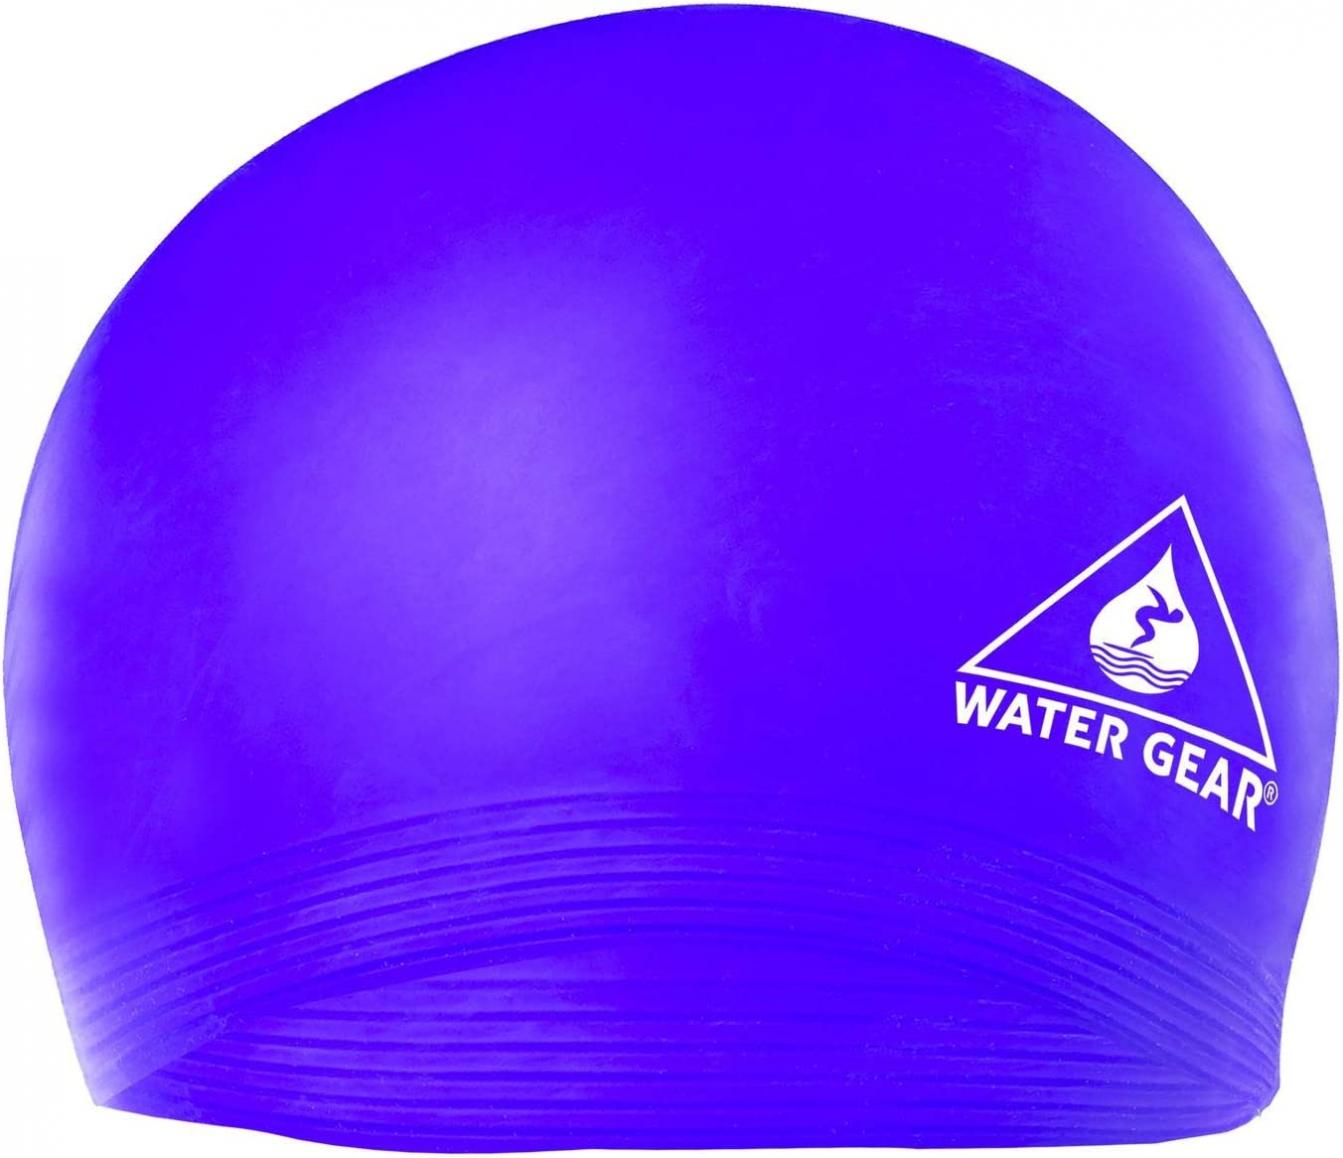 Water Gear Latex Adult Swim Cap - Durable and Flexible Unisex Non-Waterproof - Great for Short and Long Hair - Improve Your Performance - Triathlon Swimmers and Athletes